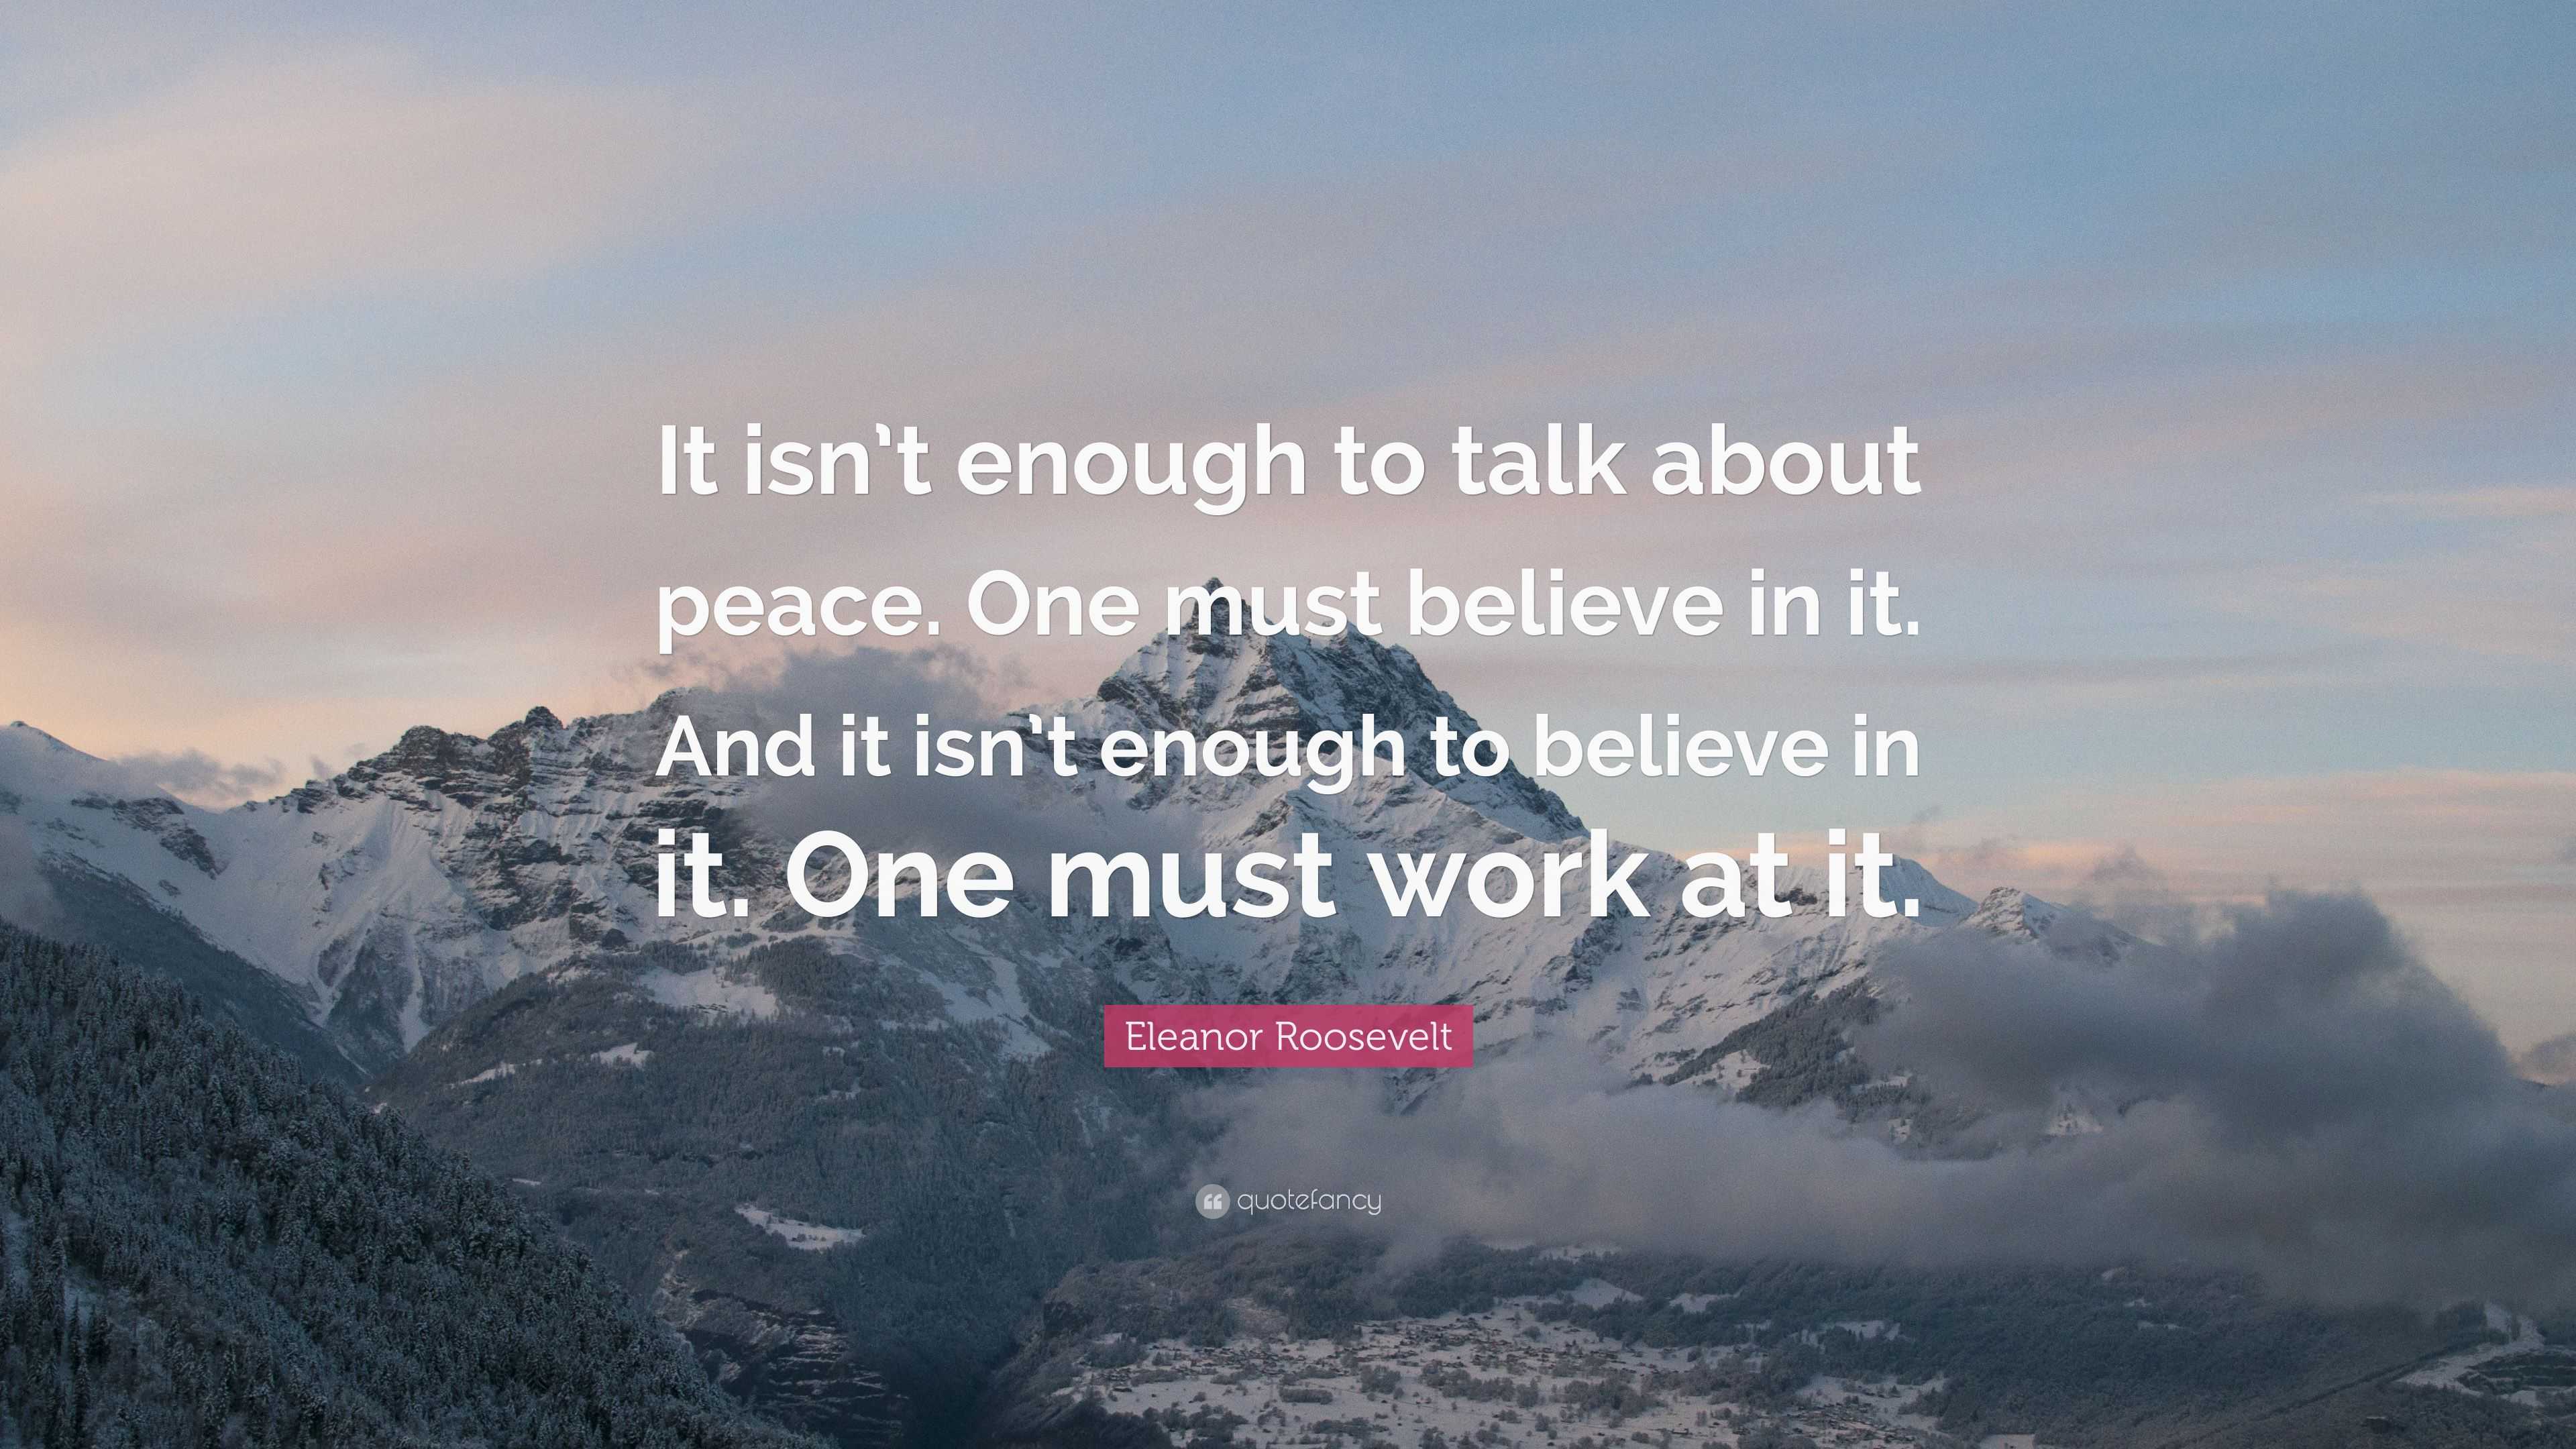 Eleanor Roosevelt Quote: “It isn’t enough to talk about peace. One must ...